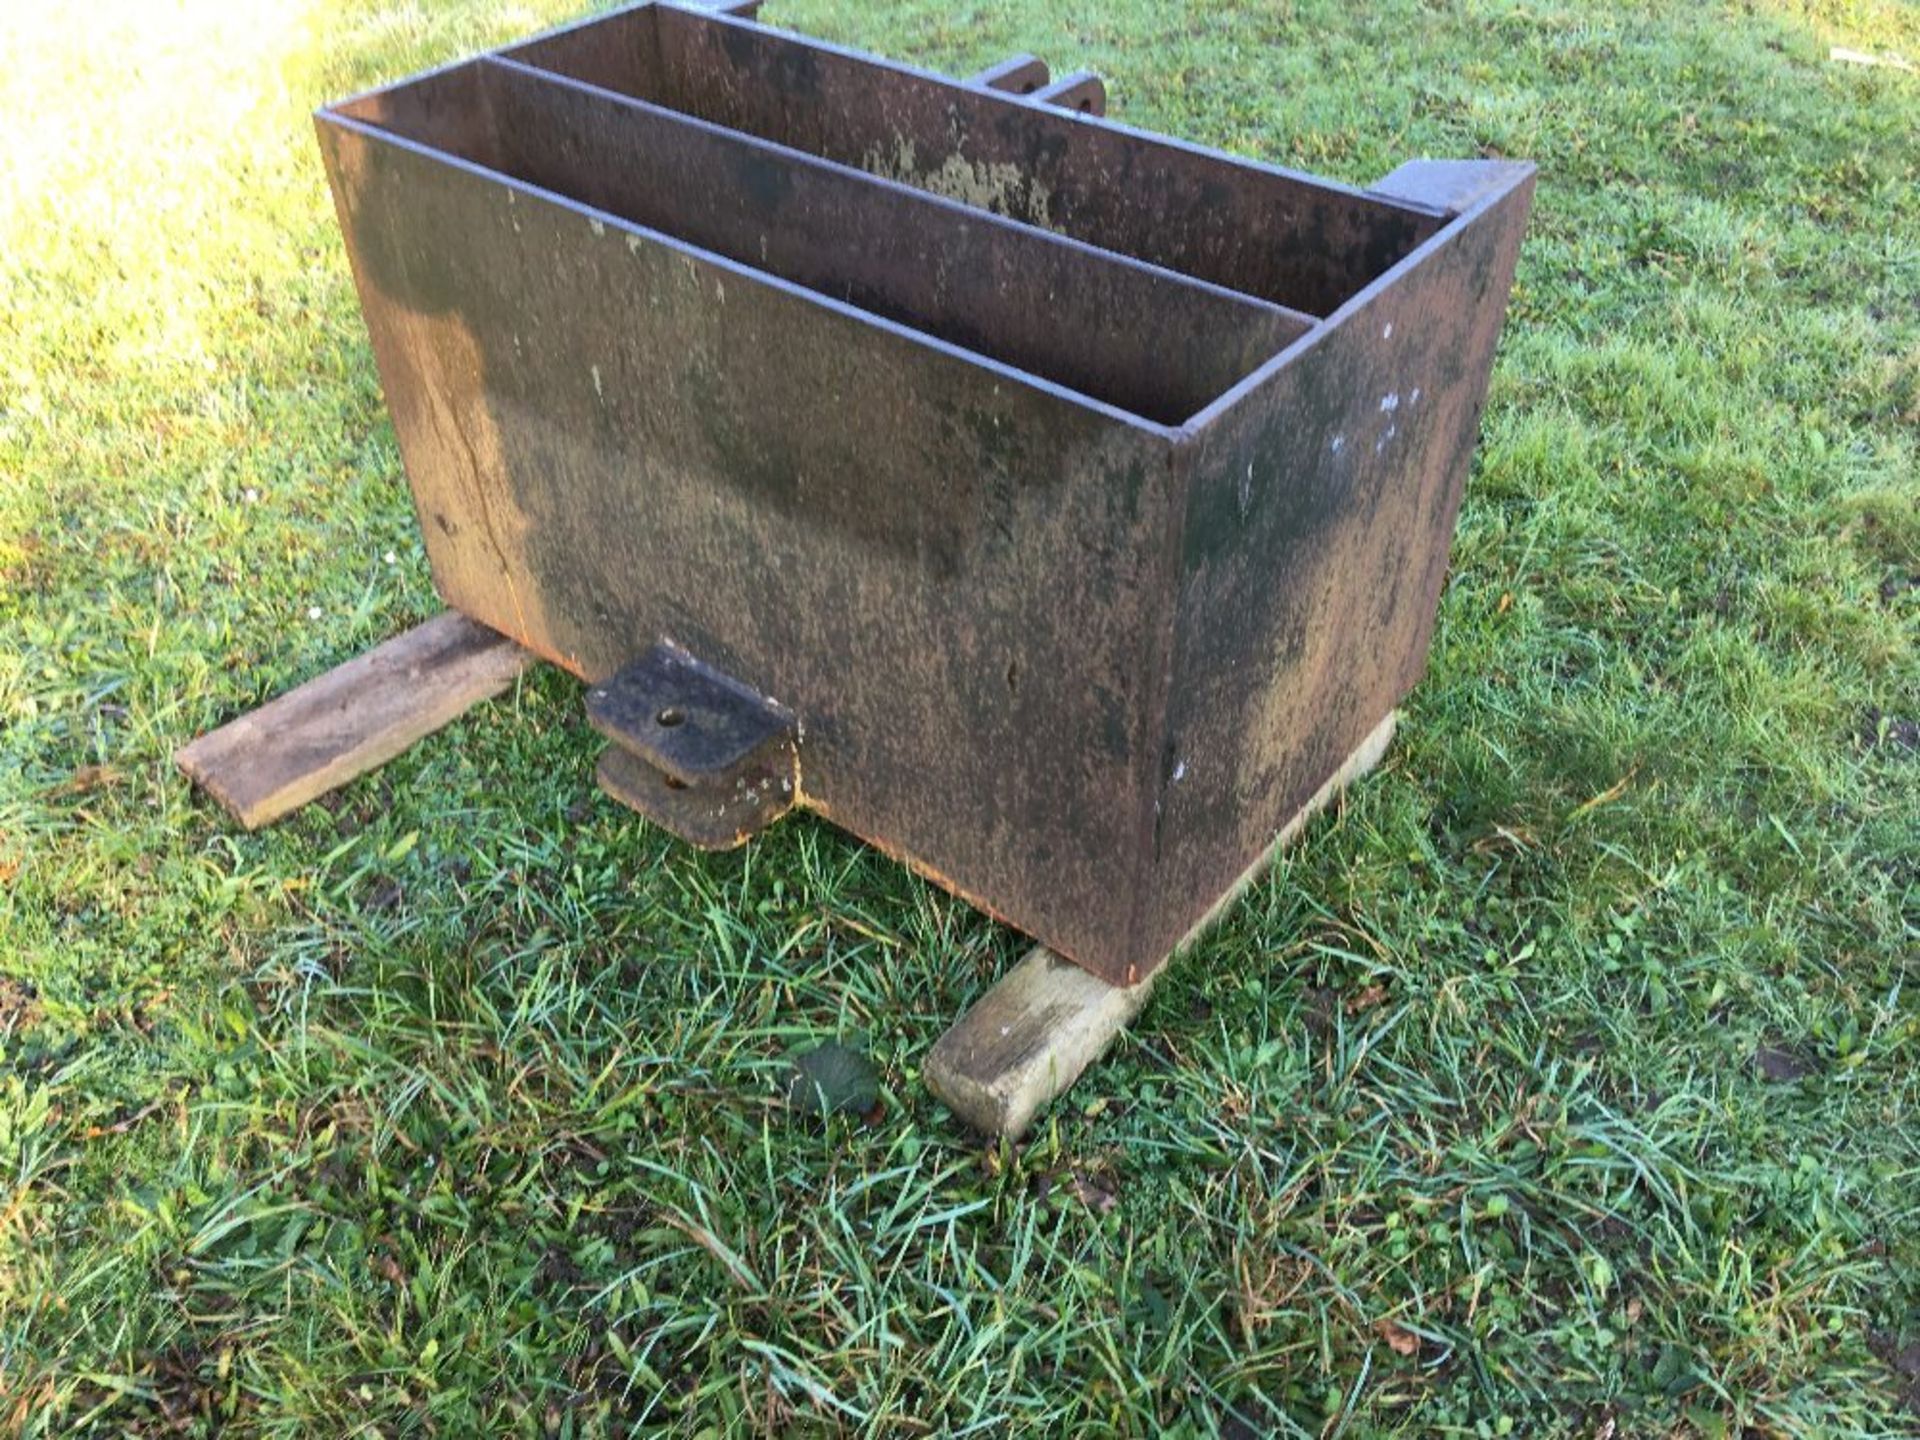 Linkage Weight Box. No VAT on this lot.